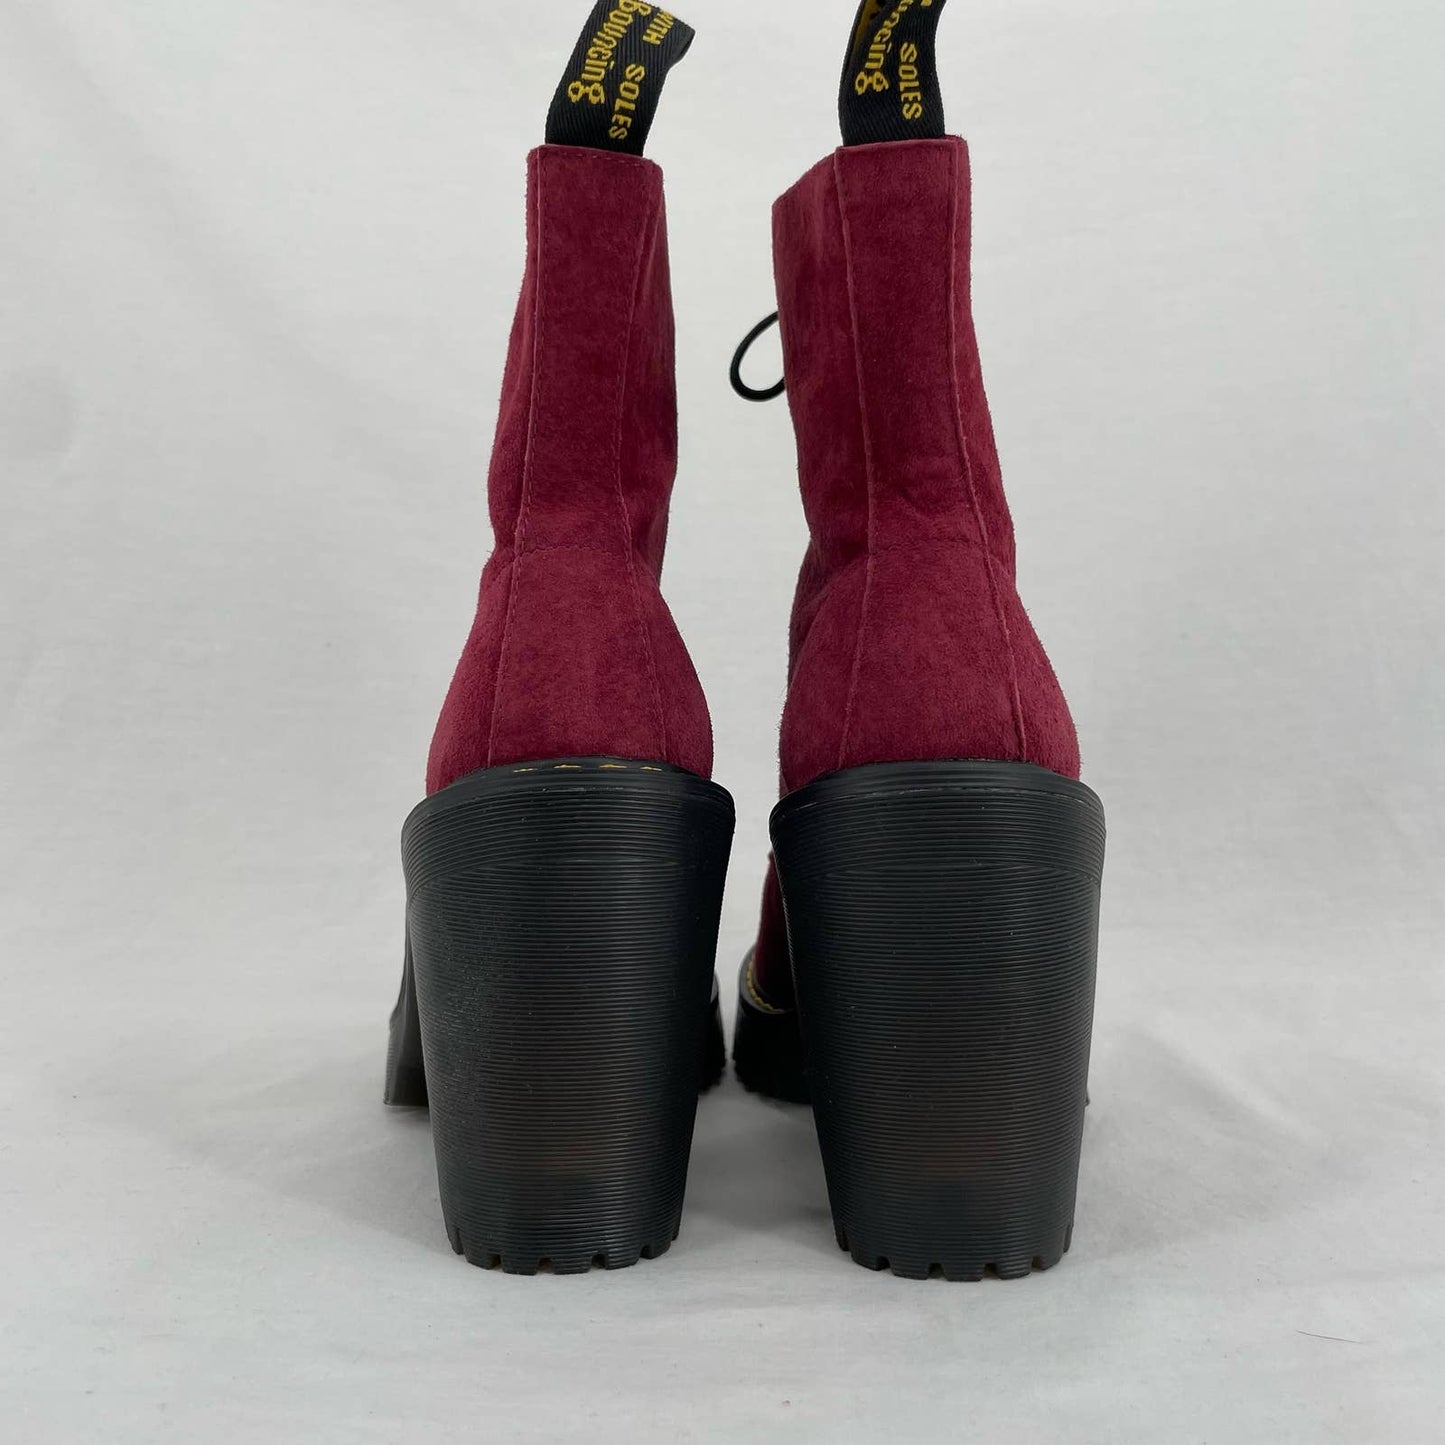 Dr. Martens Kendra Red Suede High Heels Leather Lace Up Witchy Heeled Boots Size 6